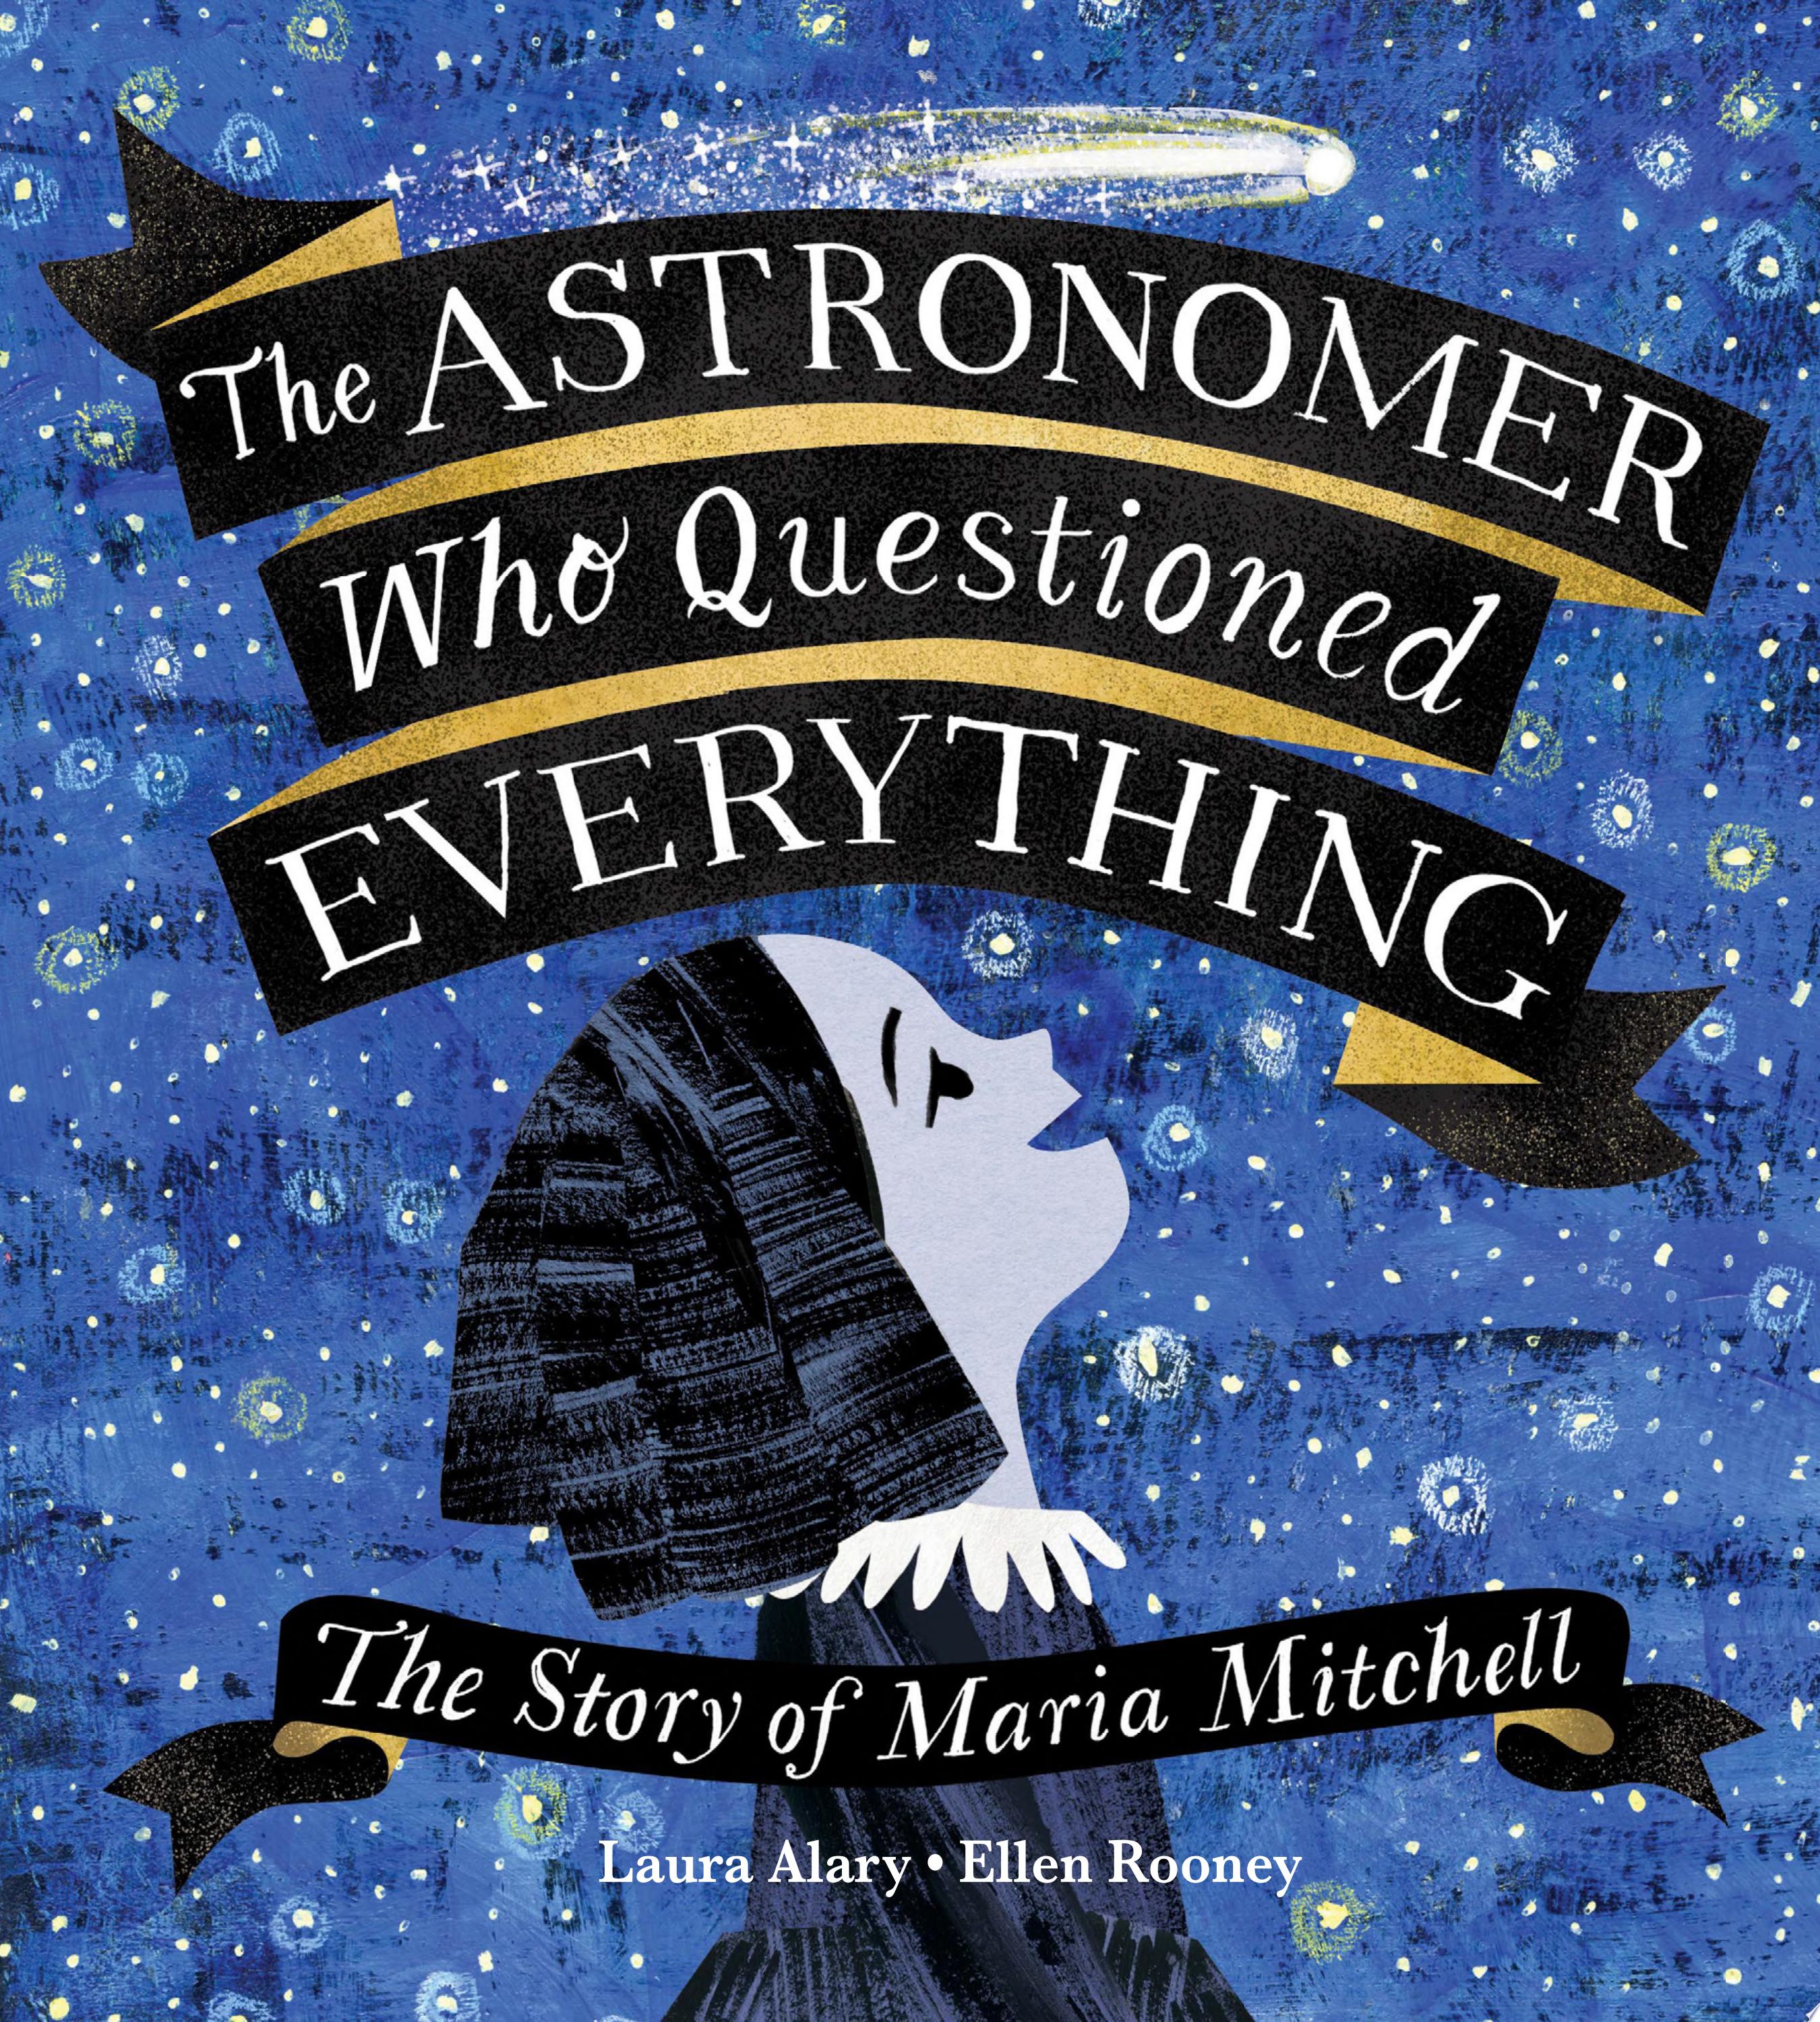 Image for "The Astronomer Who Questioned Everything"